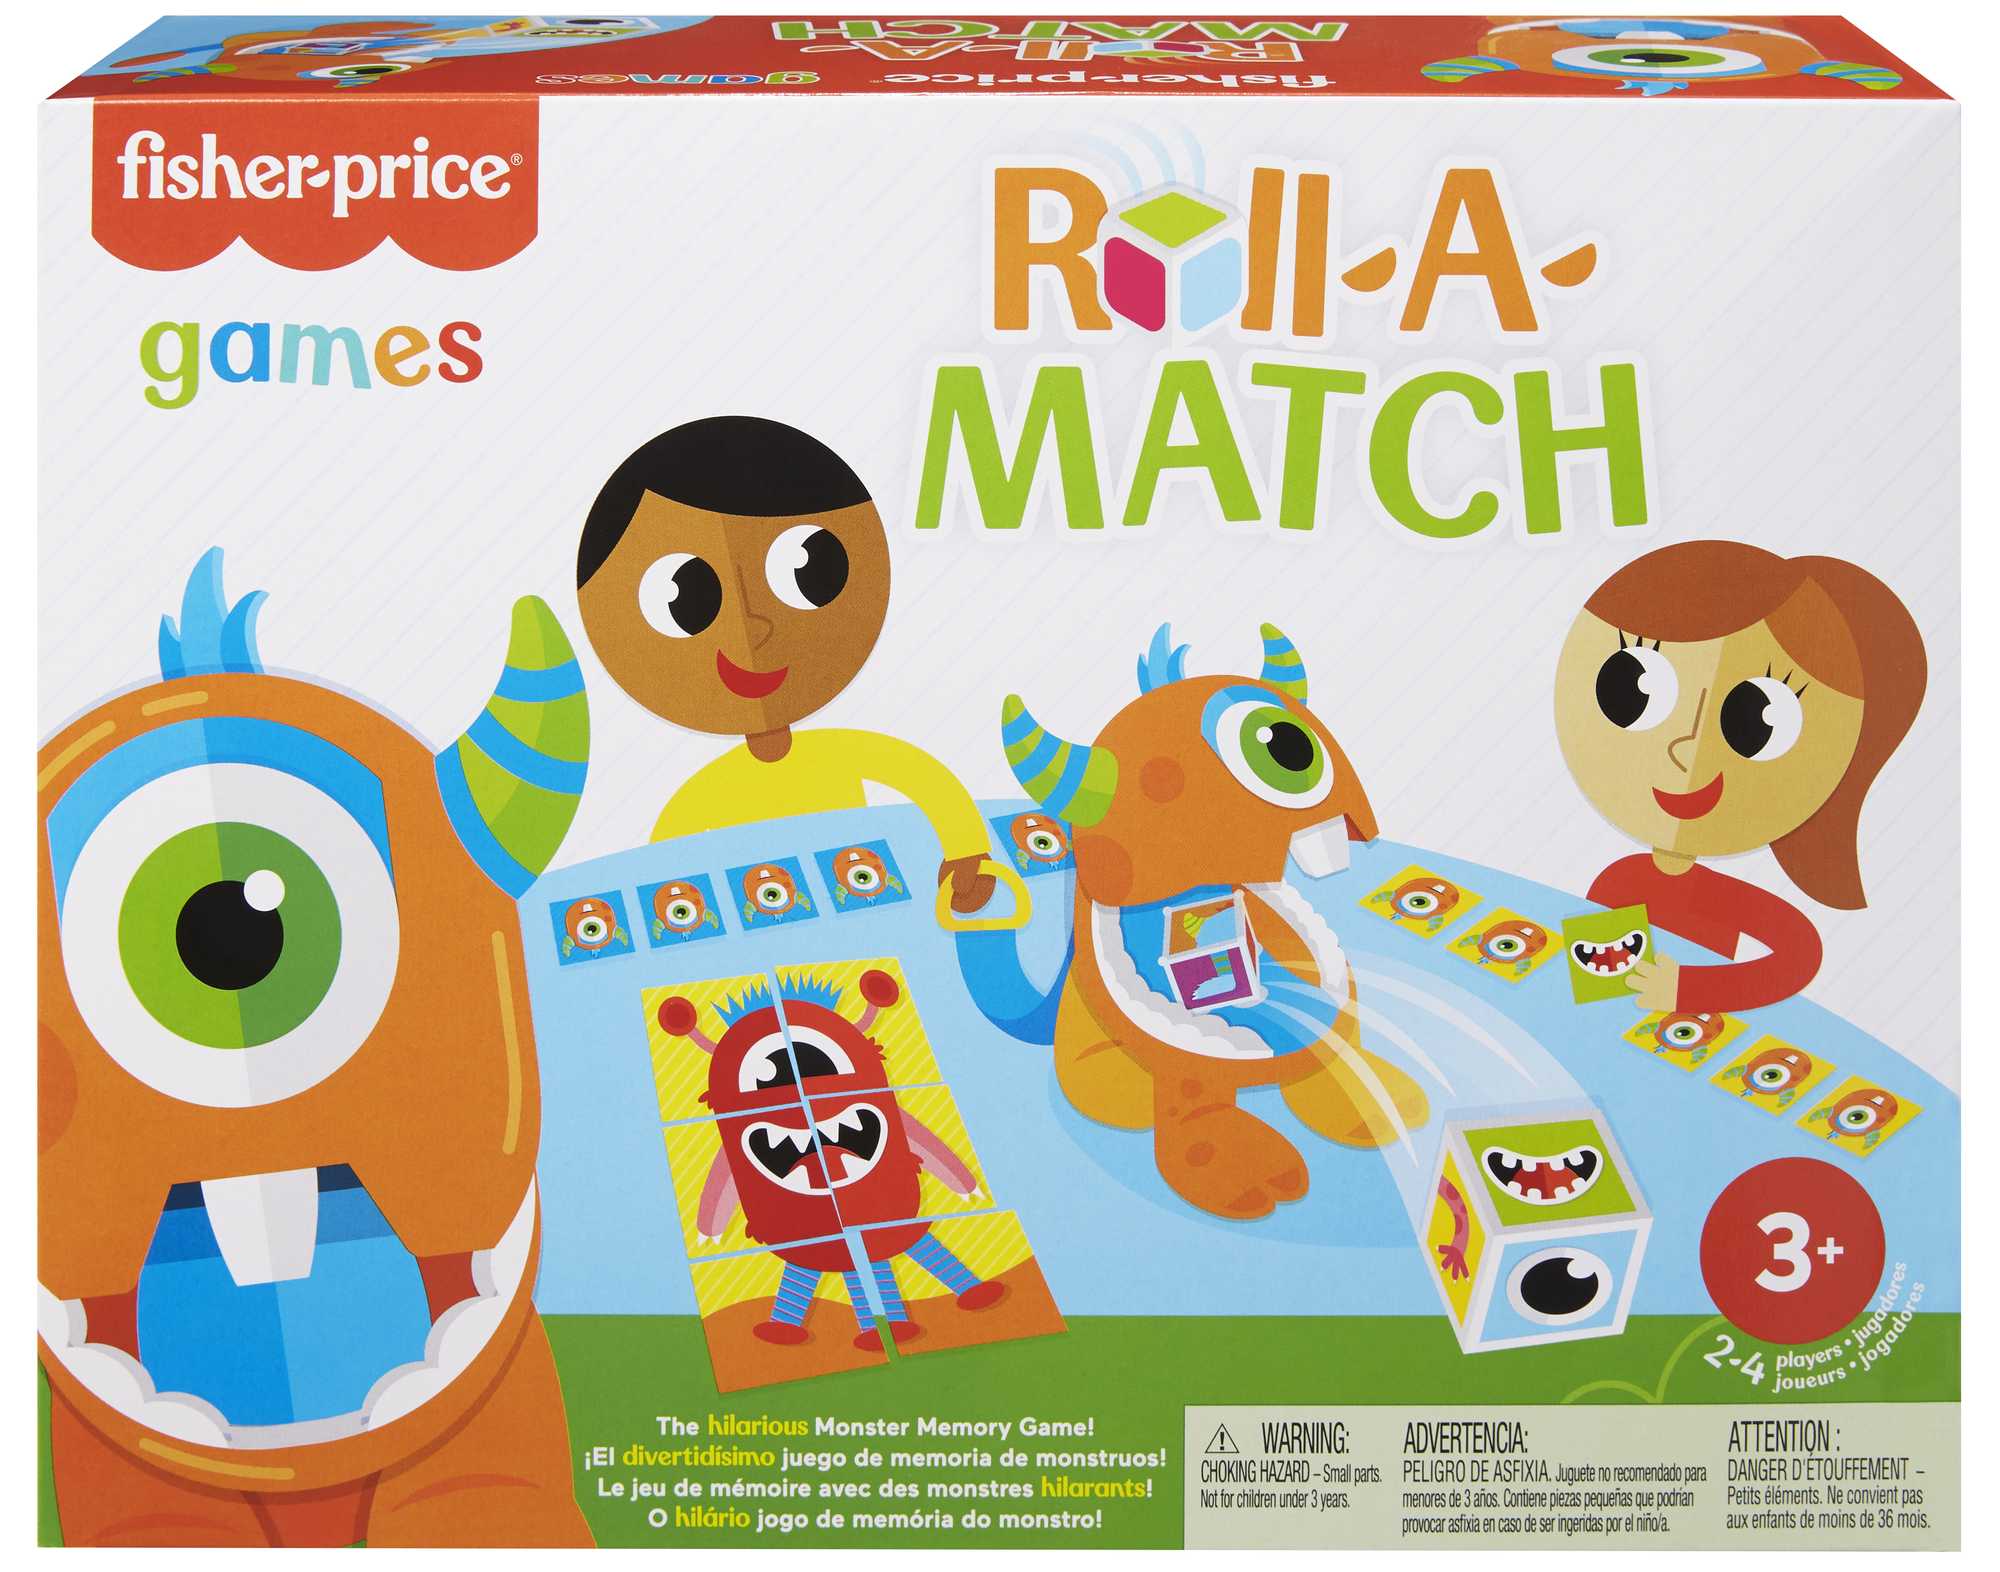 Make-A-Match Little People Card Game 